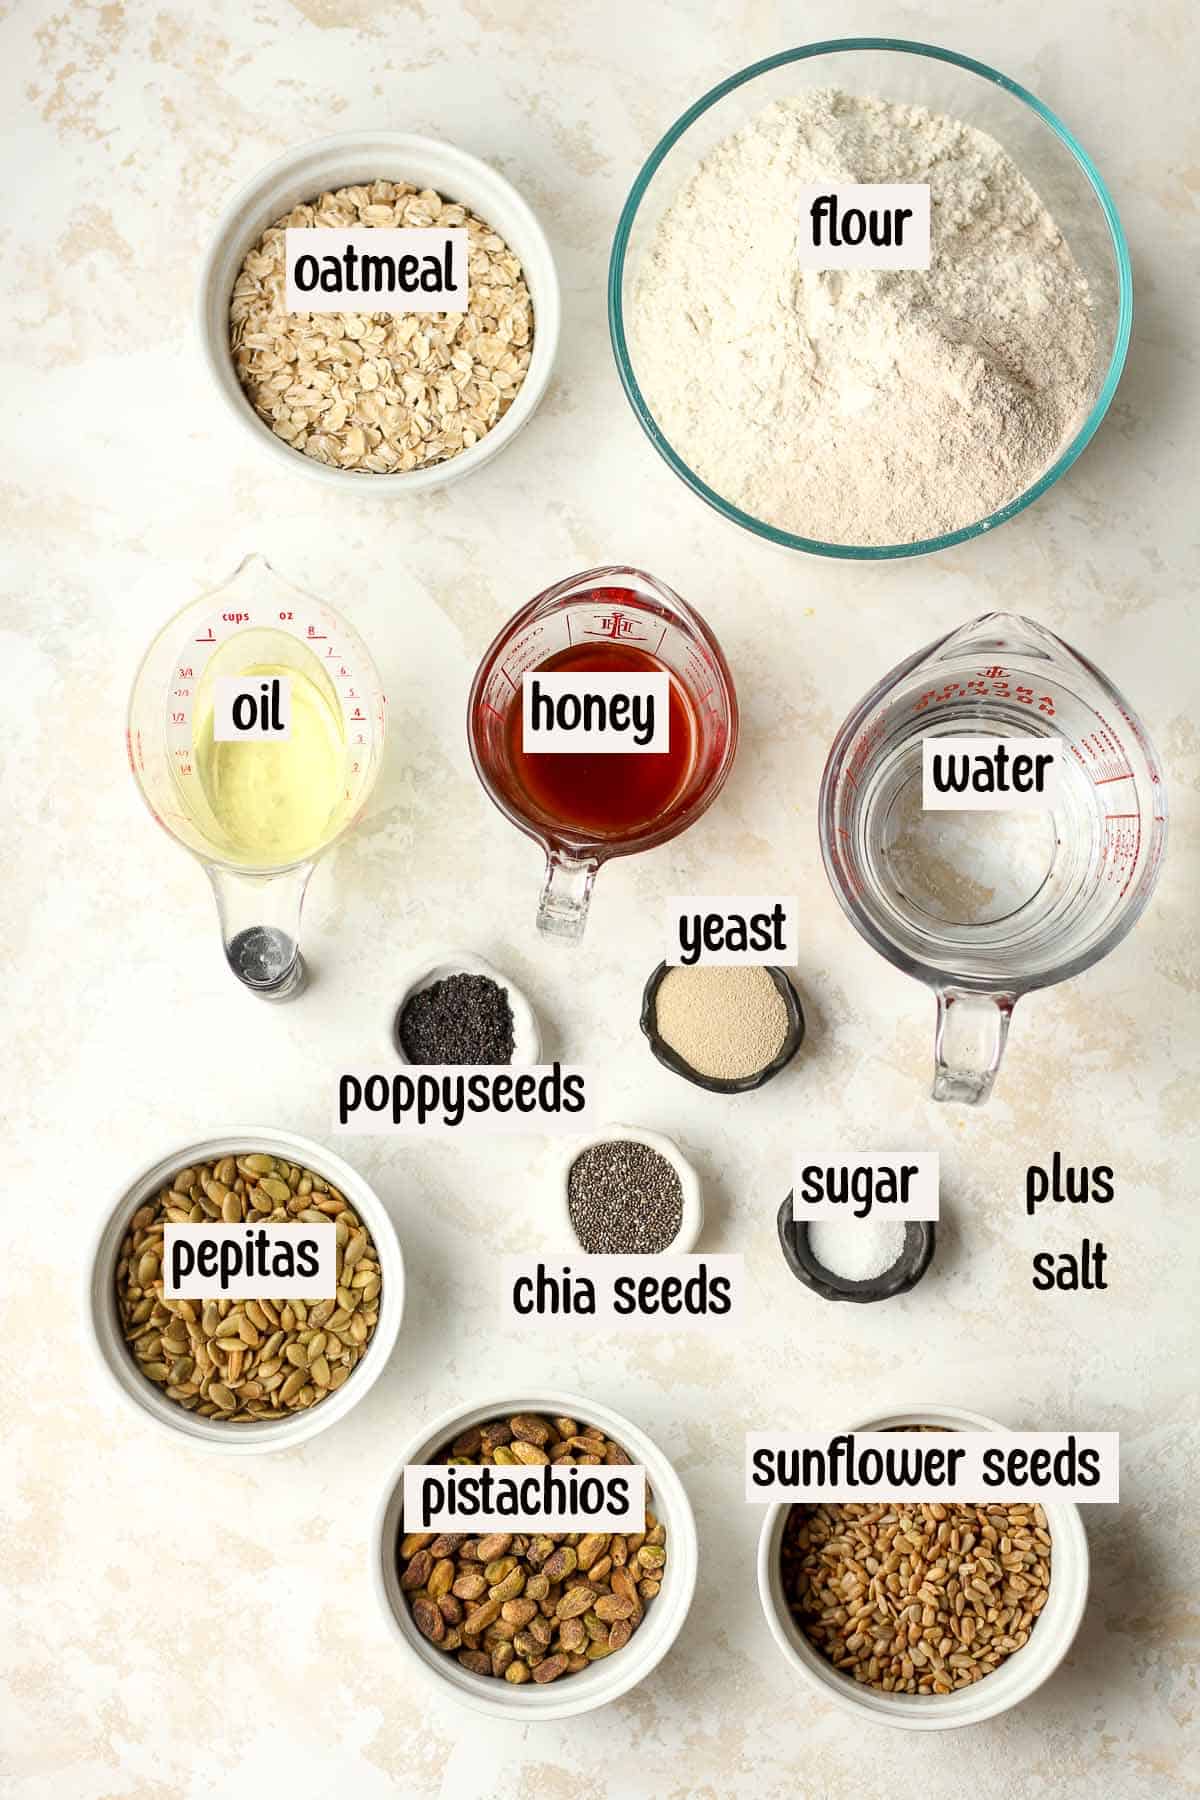 Labeled ingredients for the multigrain bread recipe.